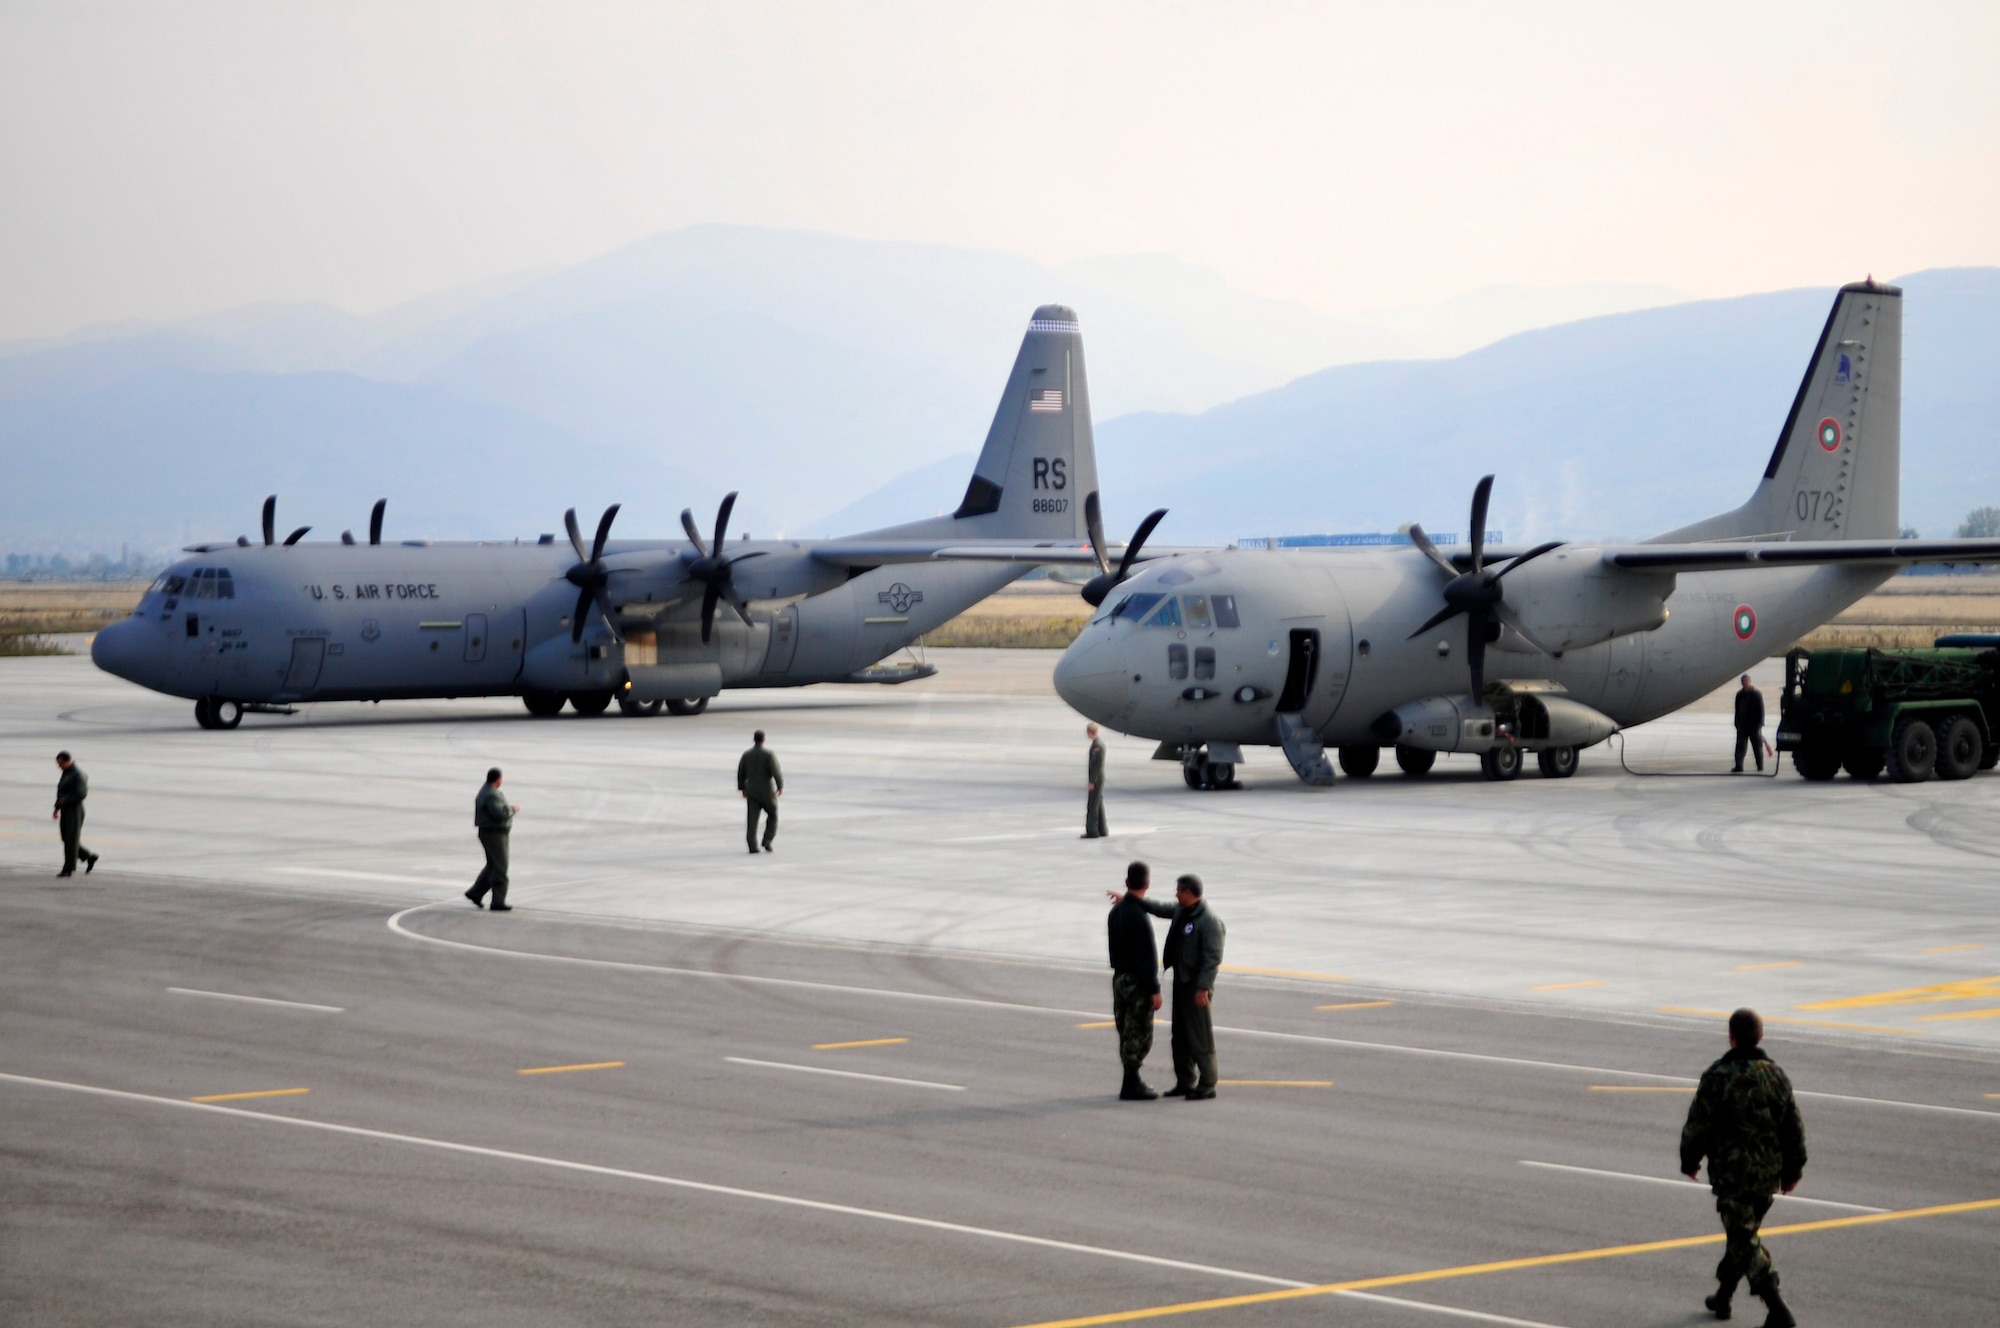 A U.S. Air Force C-130J Super Hercules and a Bulgarian C-27 Spartan sit side by side at the Plovdiv, Bulgaria airport after flying paratrooper missions, during Thracian Fall 2010, Oct. 25. Thracian Fall is a two week on-site training deployment designed to build the partnership between the U.S. and Bulgarian Air Force. (U.S. Air Force photo by Tech. Sgt. Michael Voss)